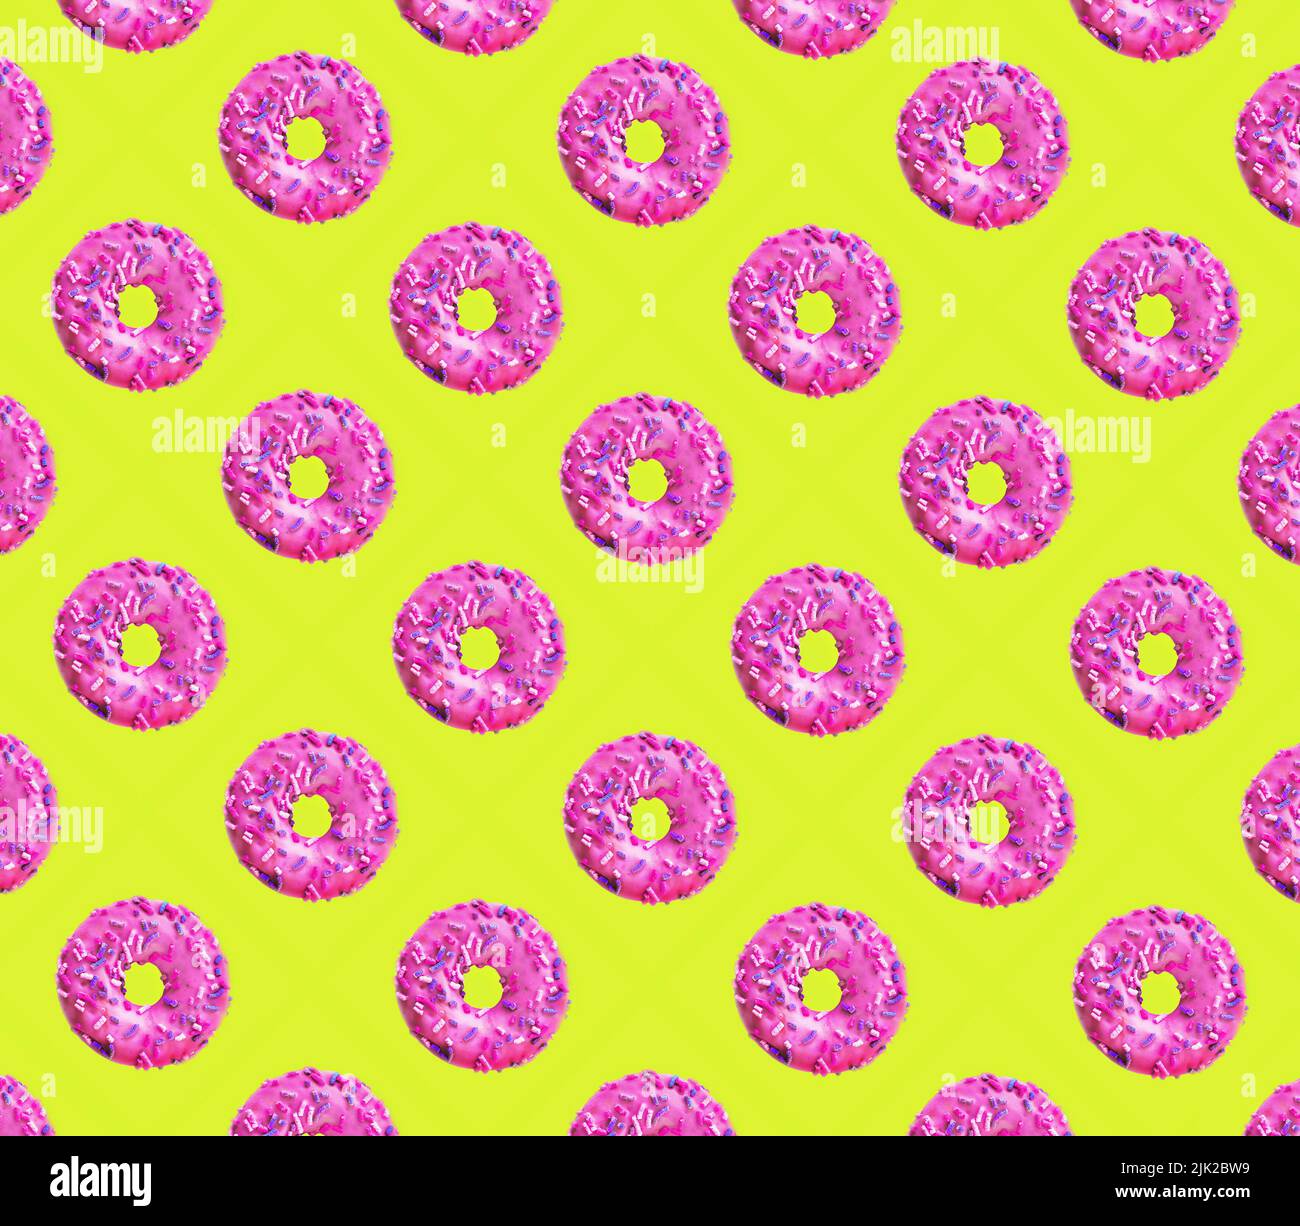 retro pattern with pink donuts on yellow Stock Photo